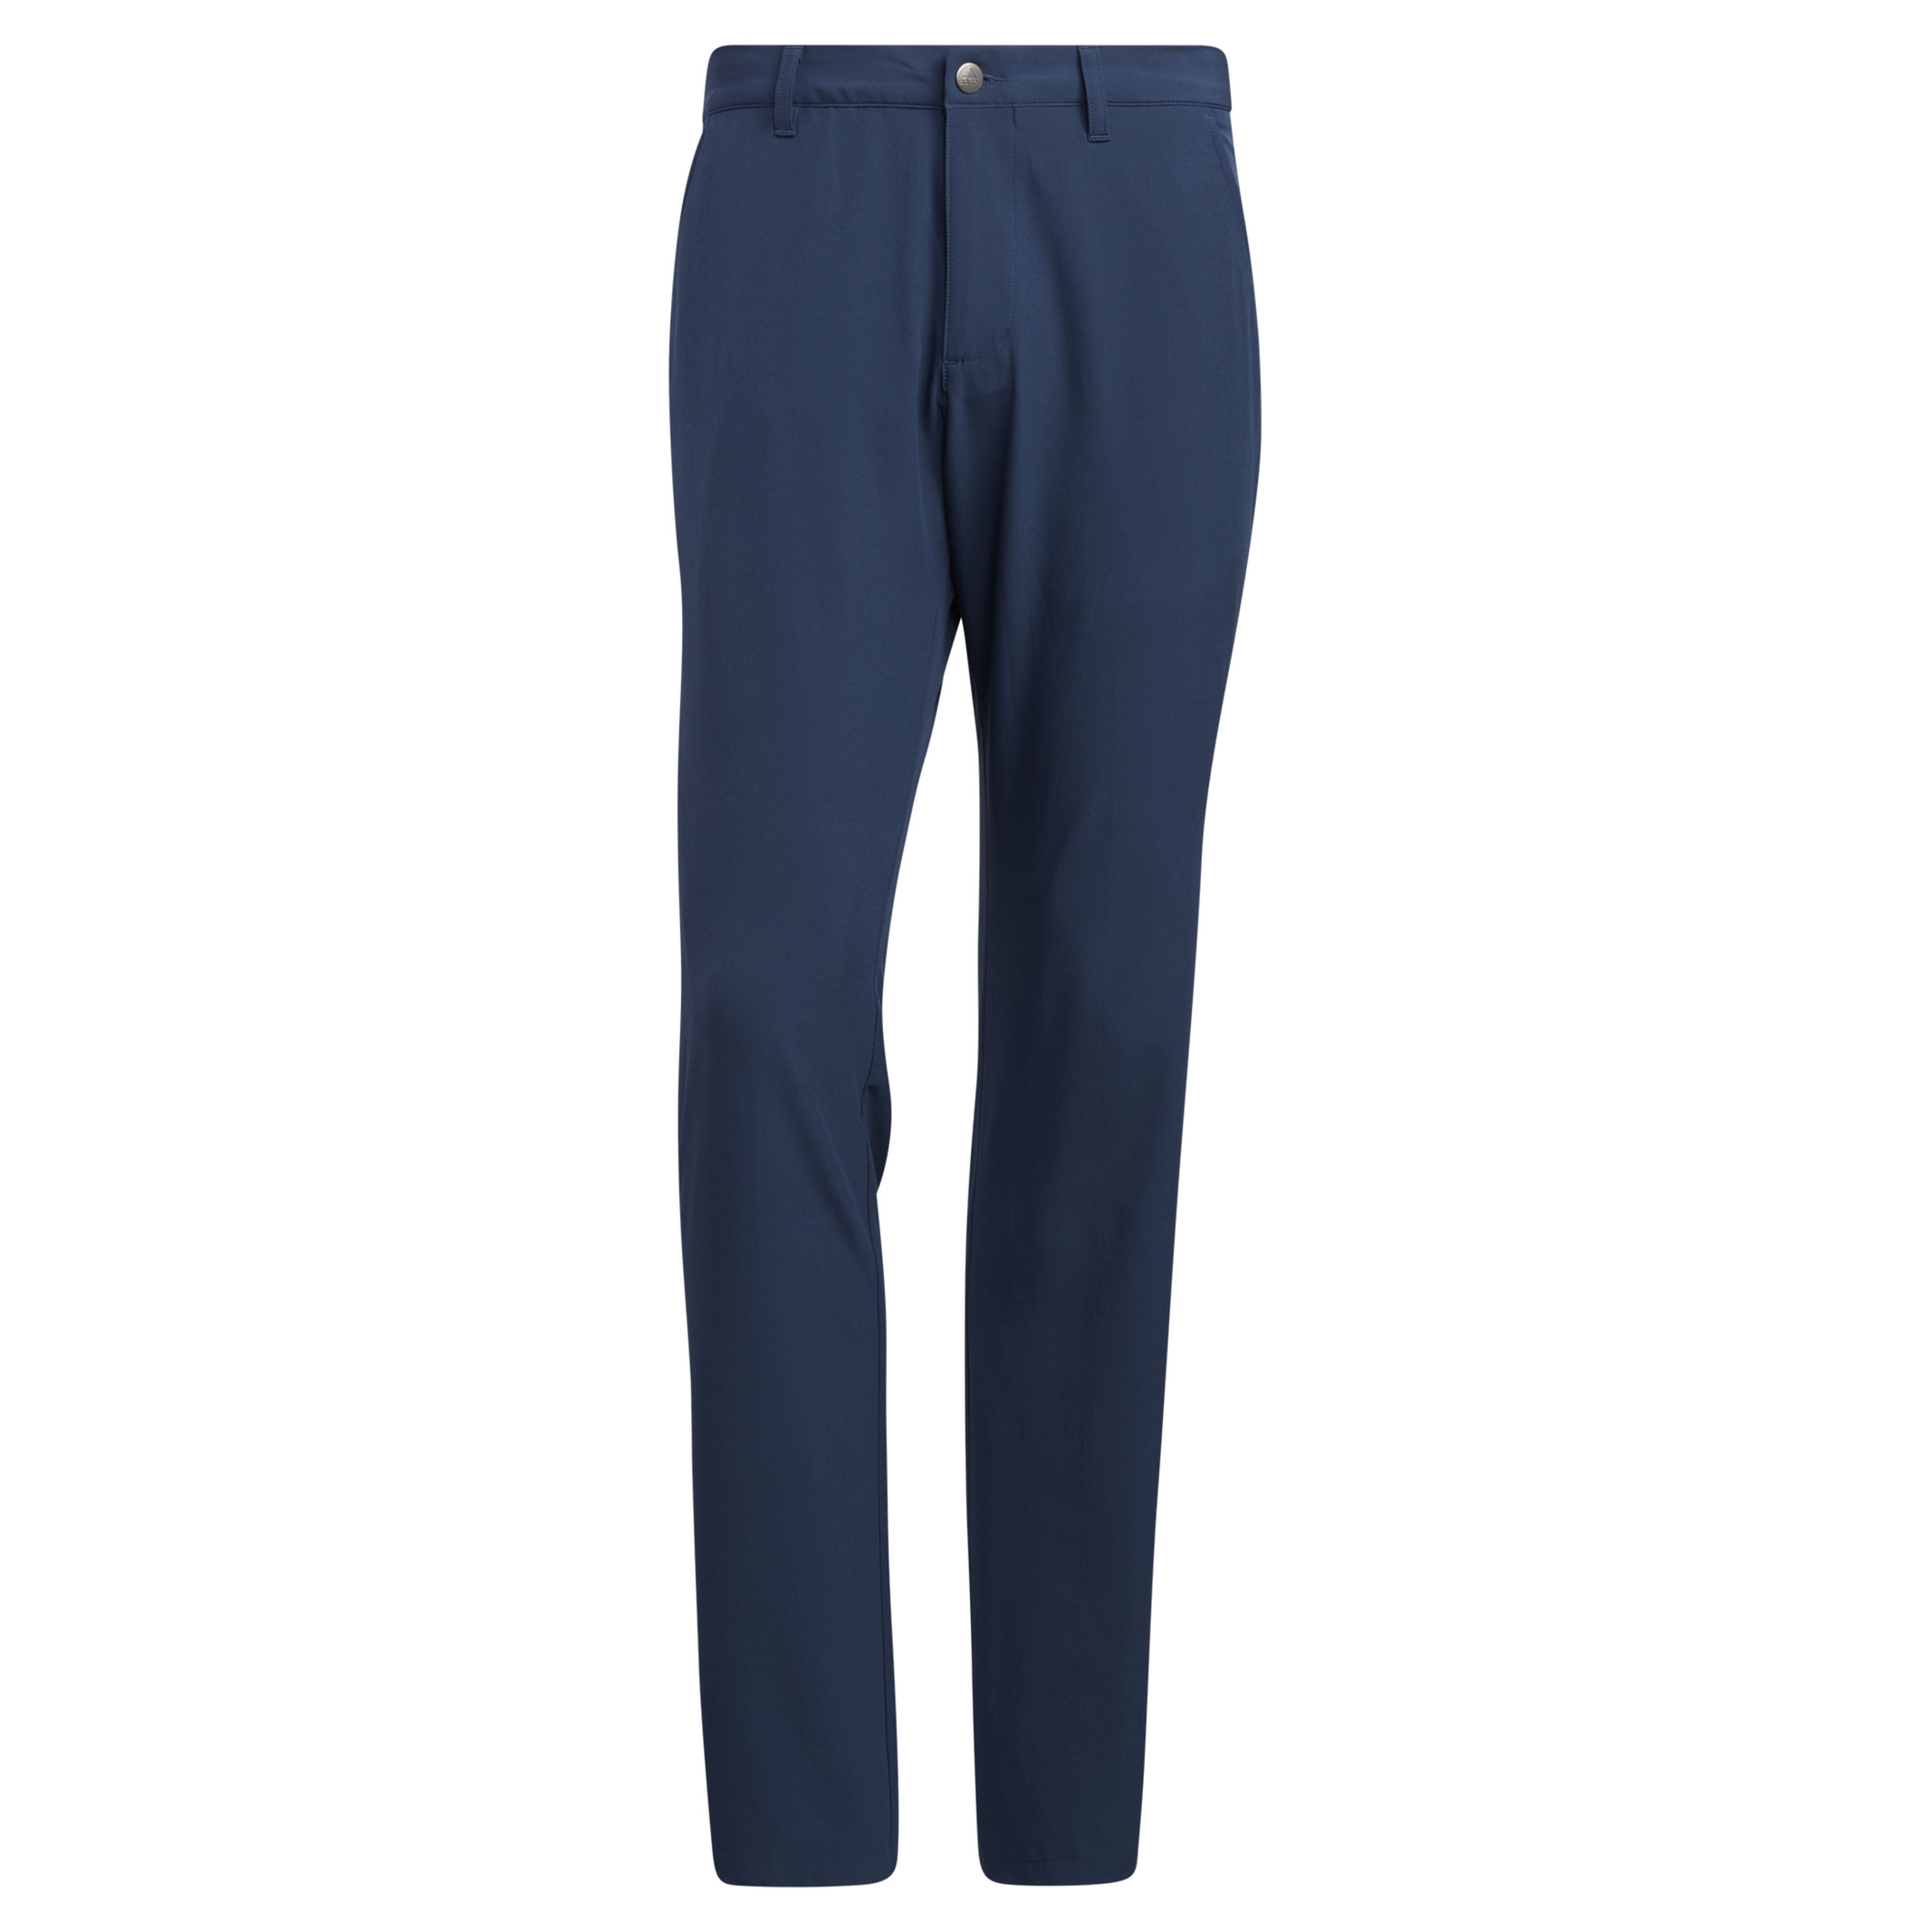 Adidas Ultimate Pant Tapered Navy